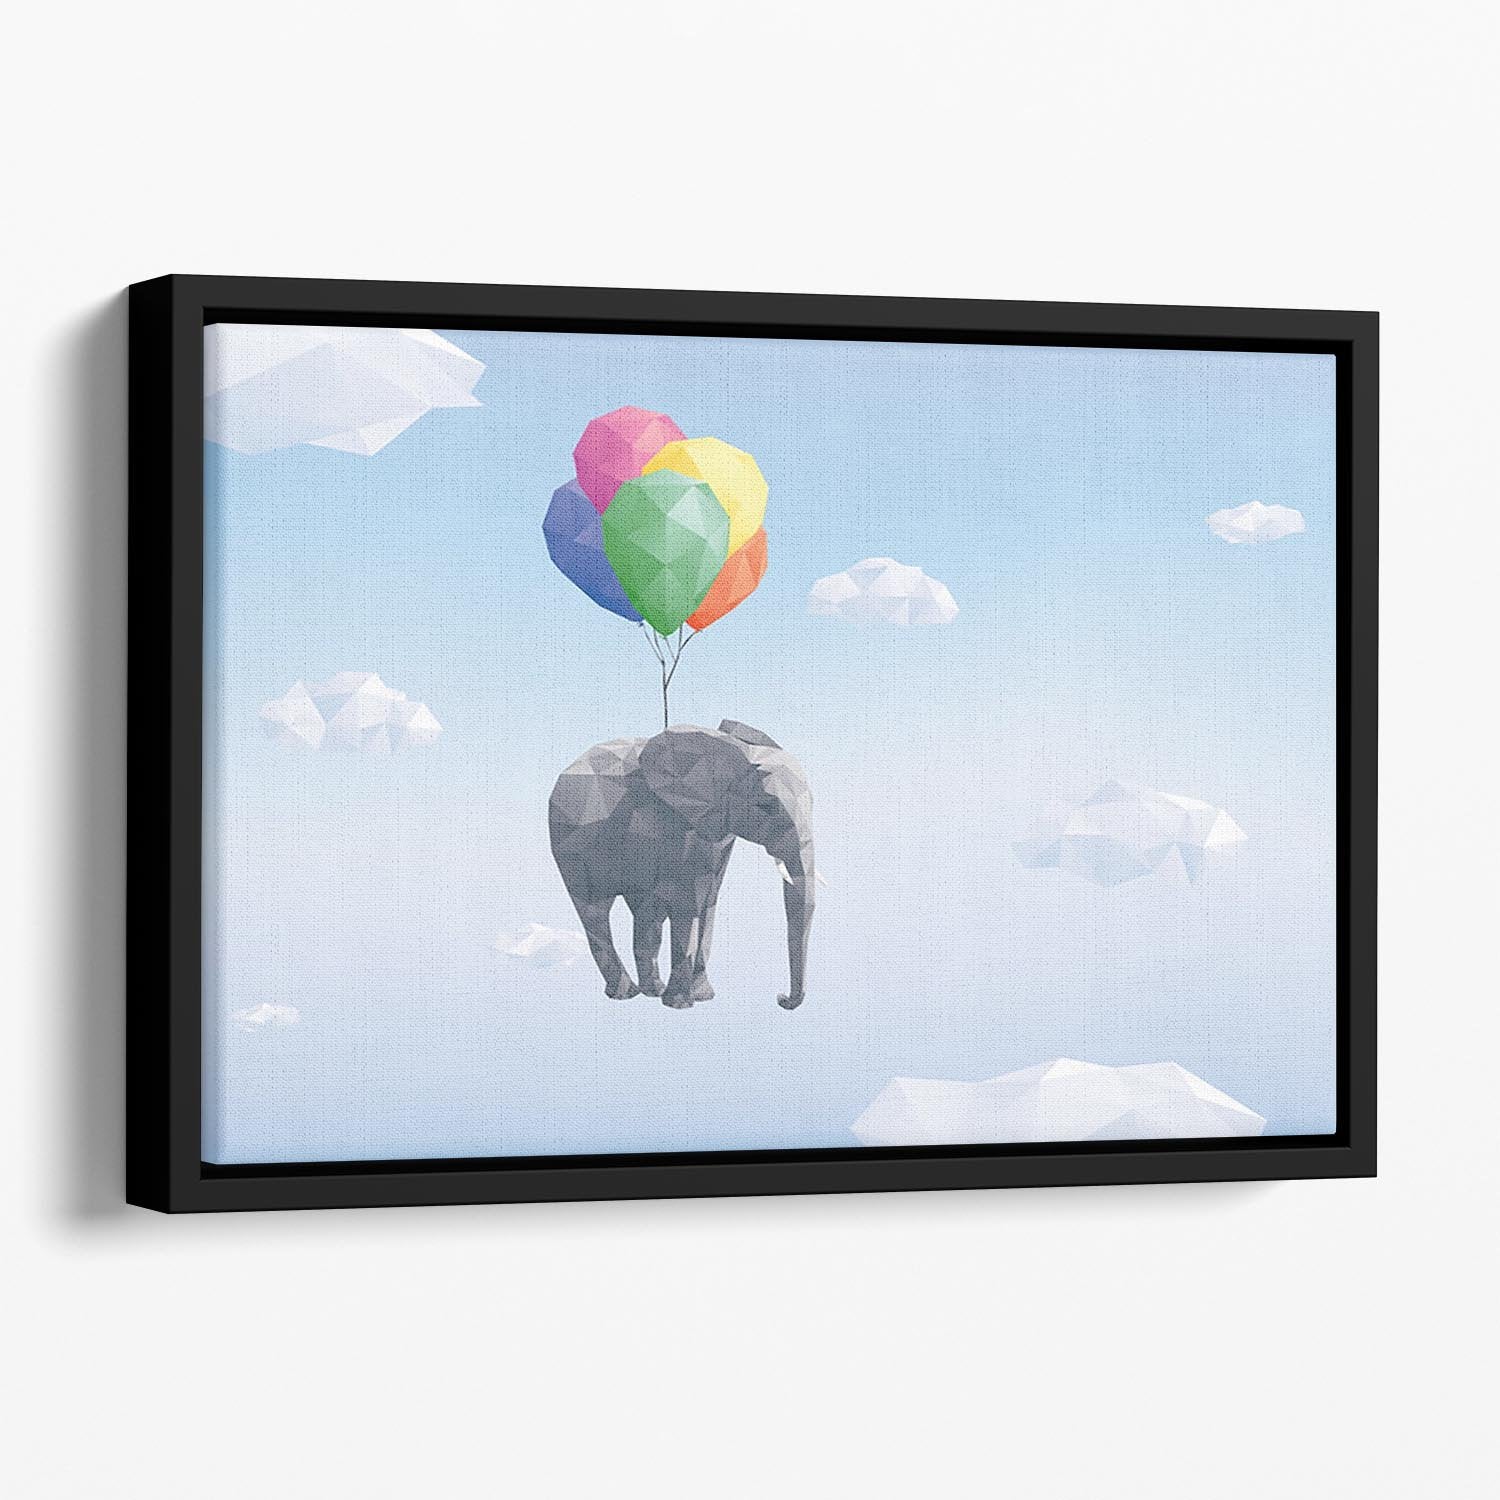 Low Poly Elephant attached to balloons flying through cloudy sky Floating Framed Canvas - Canvas Art Rocks - 1